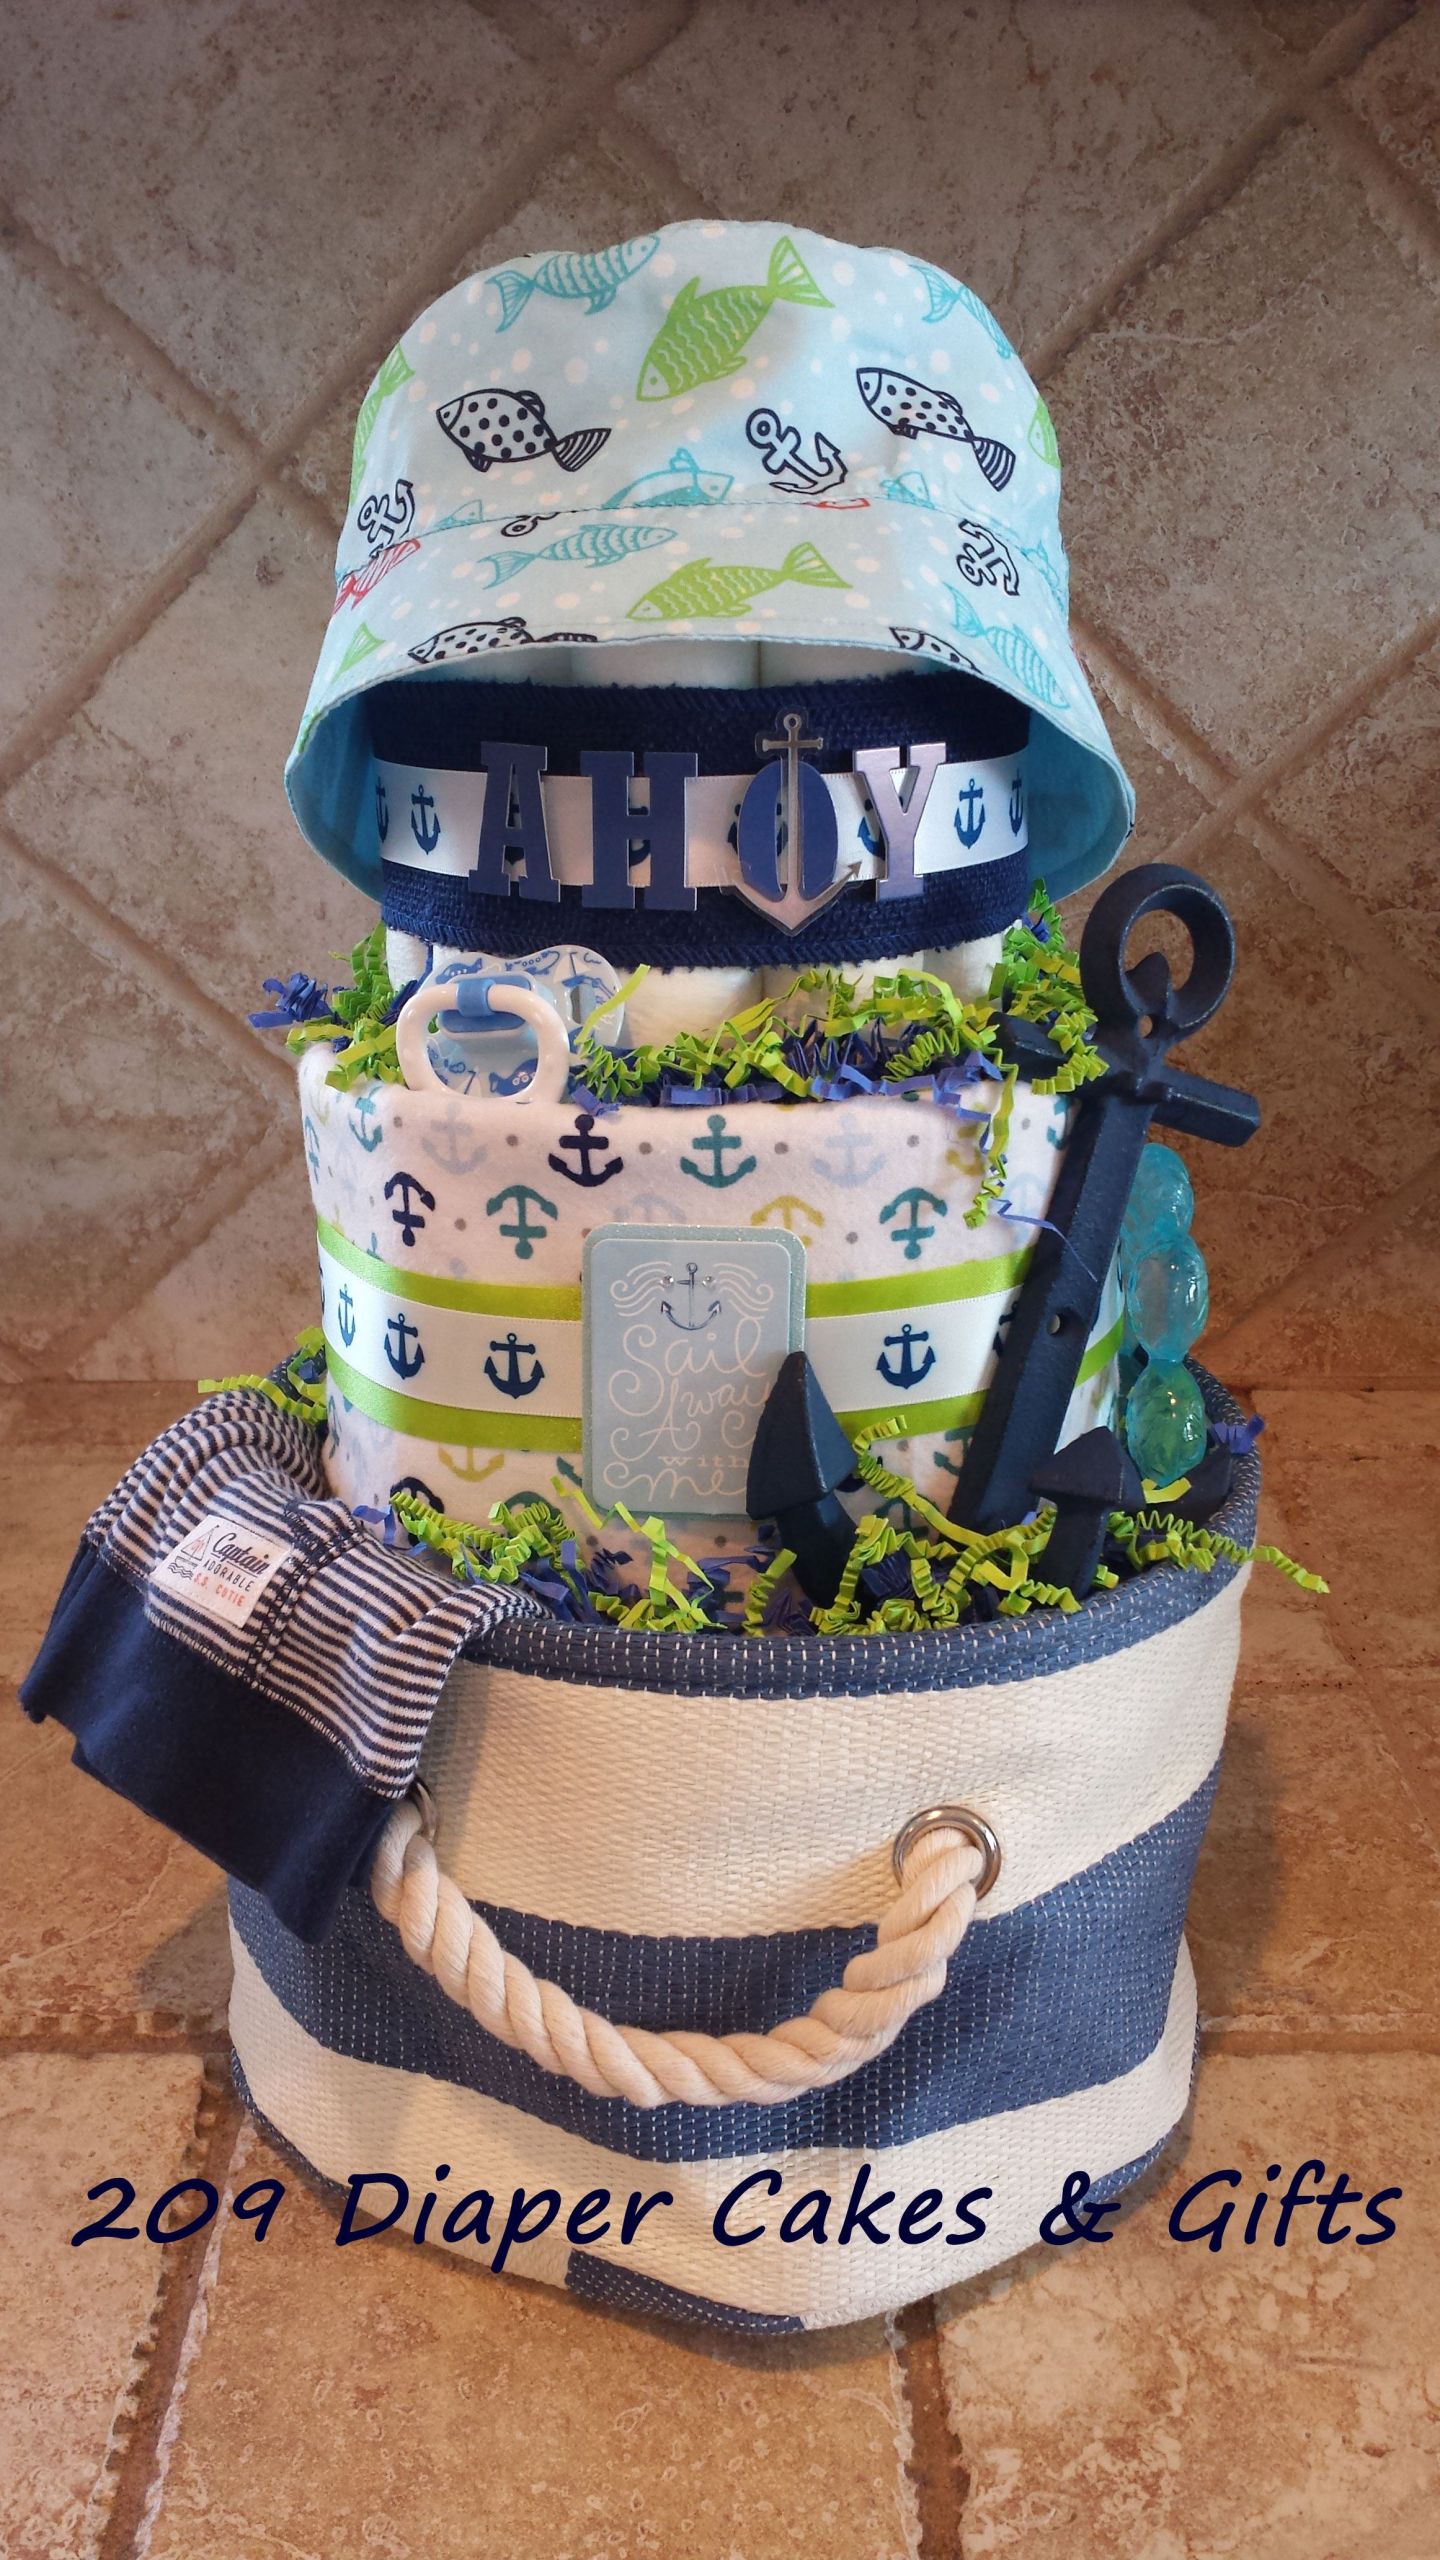 Nautical Baby Shower Gift Ideas
 Nautical Anchor Diaper Cake for Baby Boy by 209 Diaper